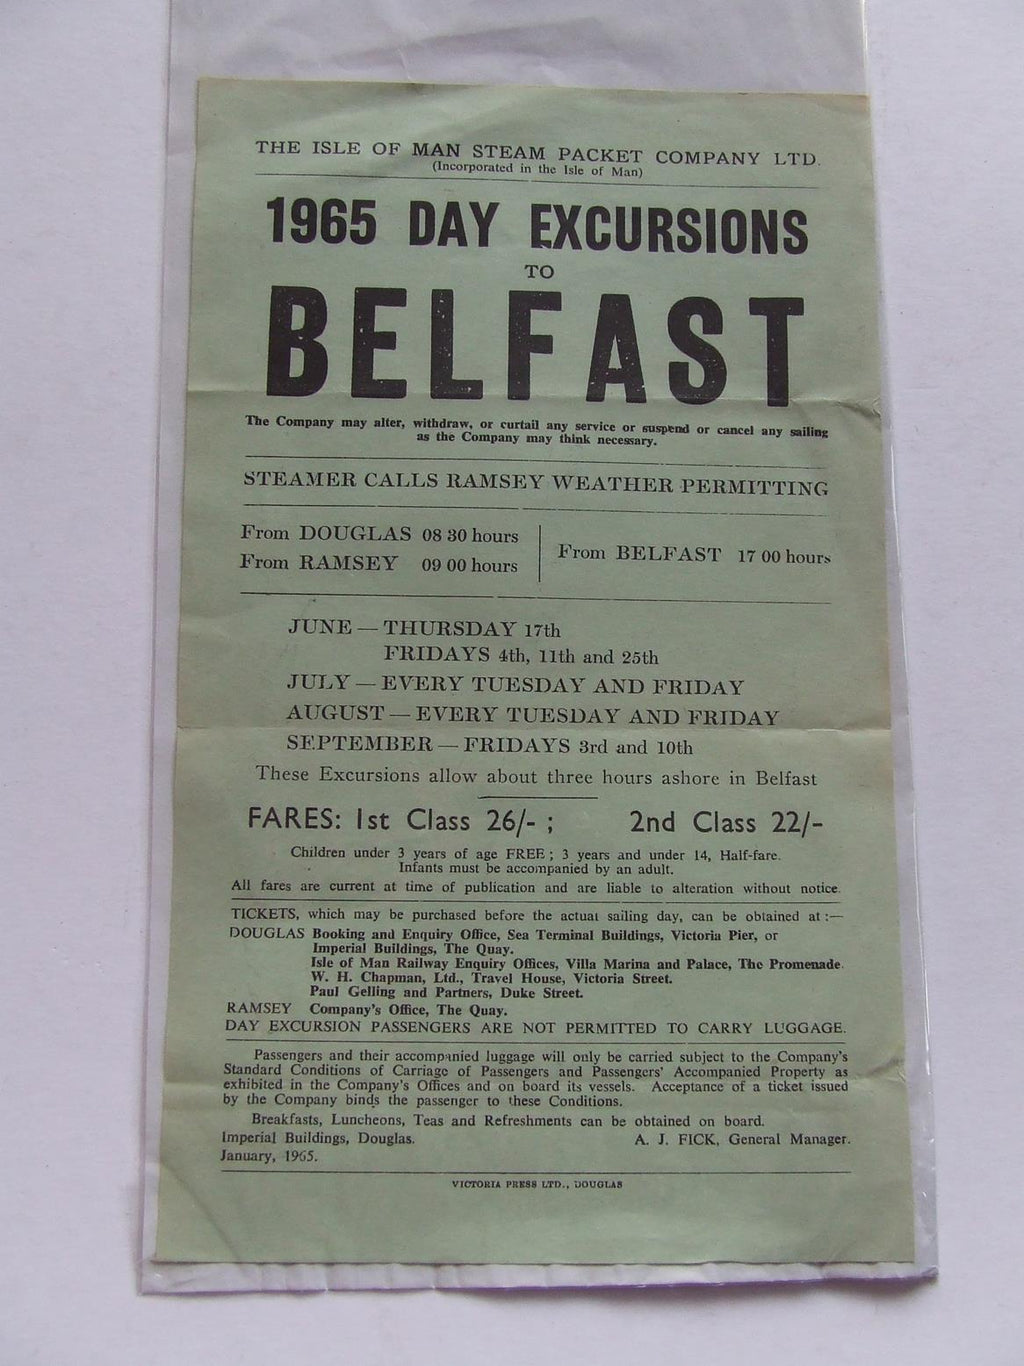 Isle of Man Steam Packet Co. Ltd. 1965 Day Excursions to Belfast